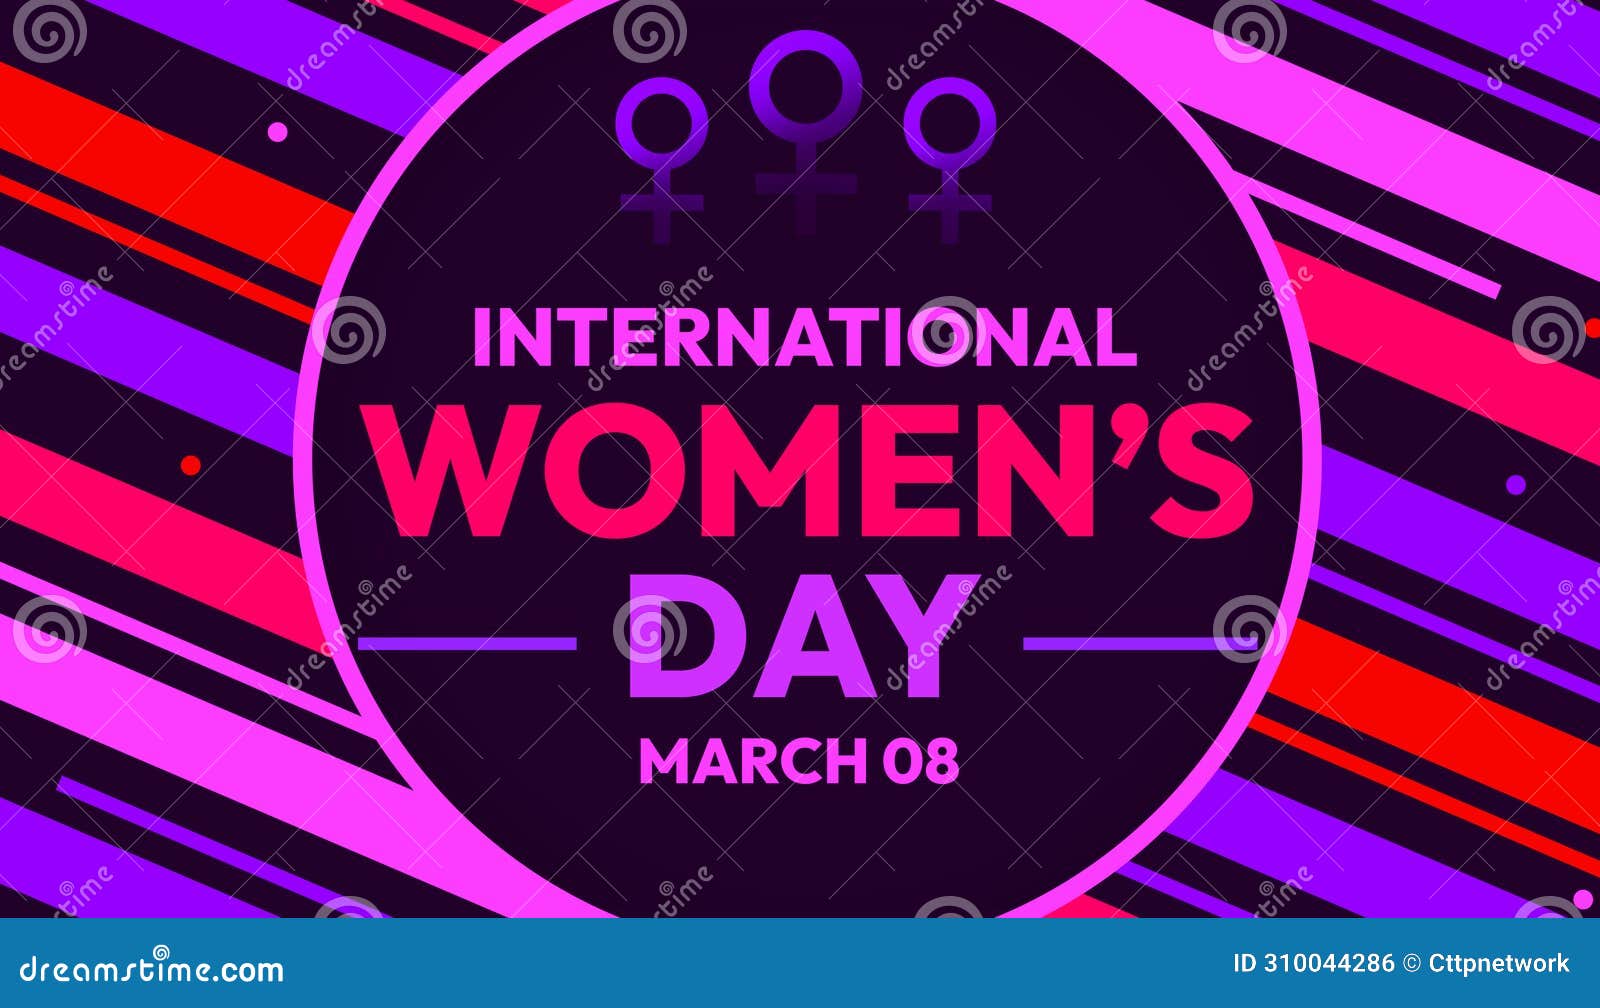 march 08 is celebrated as international women's day in the world, colorful background  with typography and s